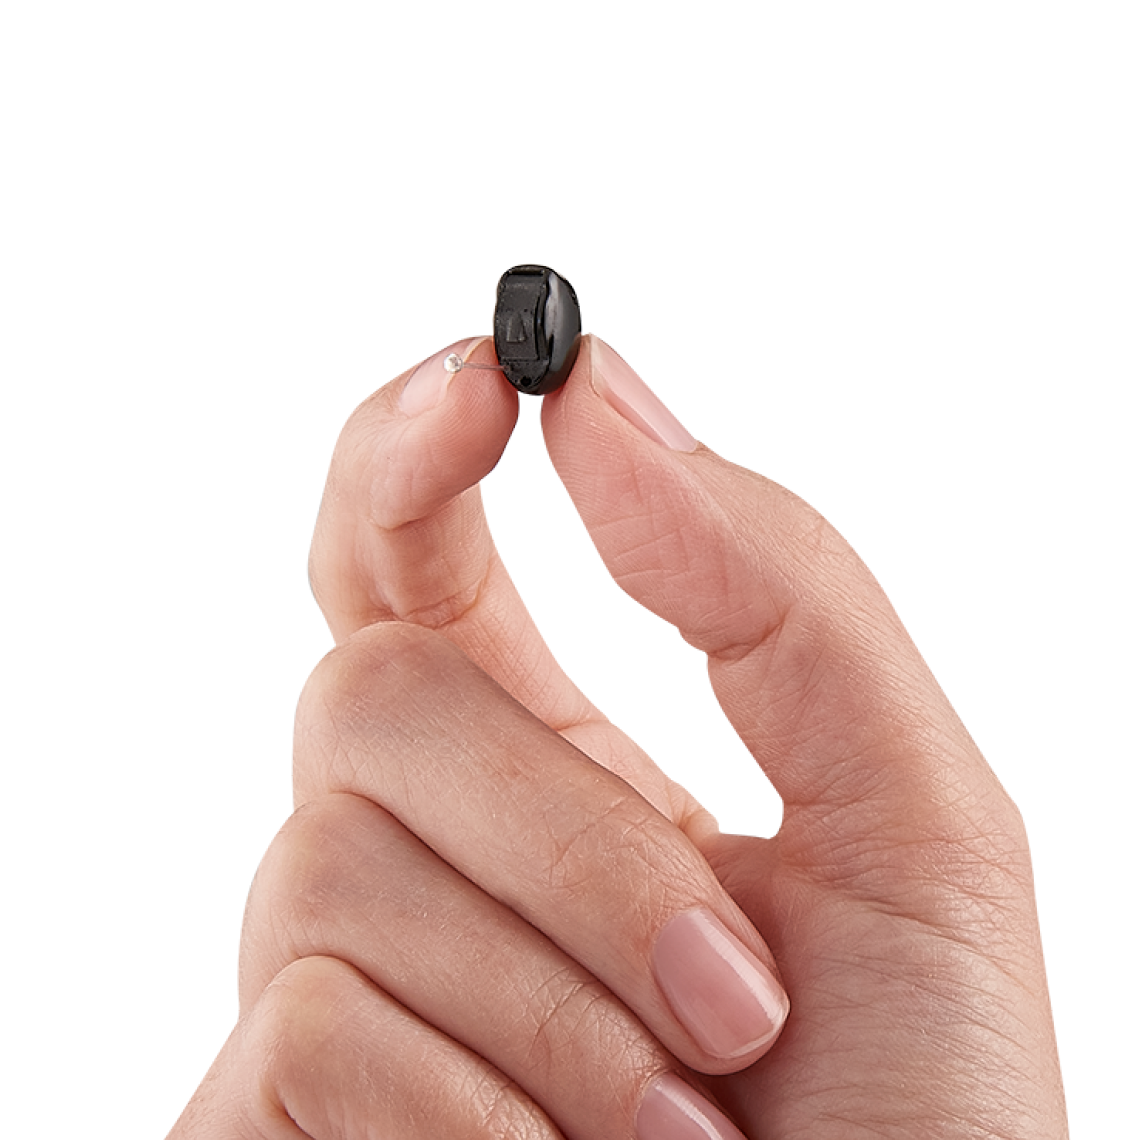 An IIC hearing aids being held in a hand